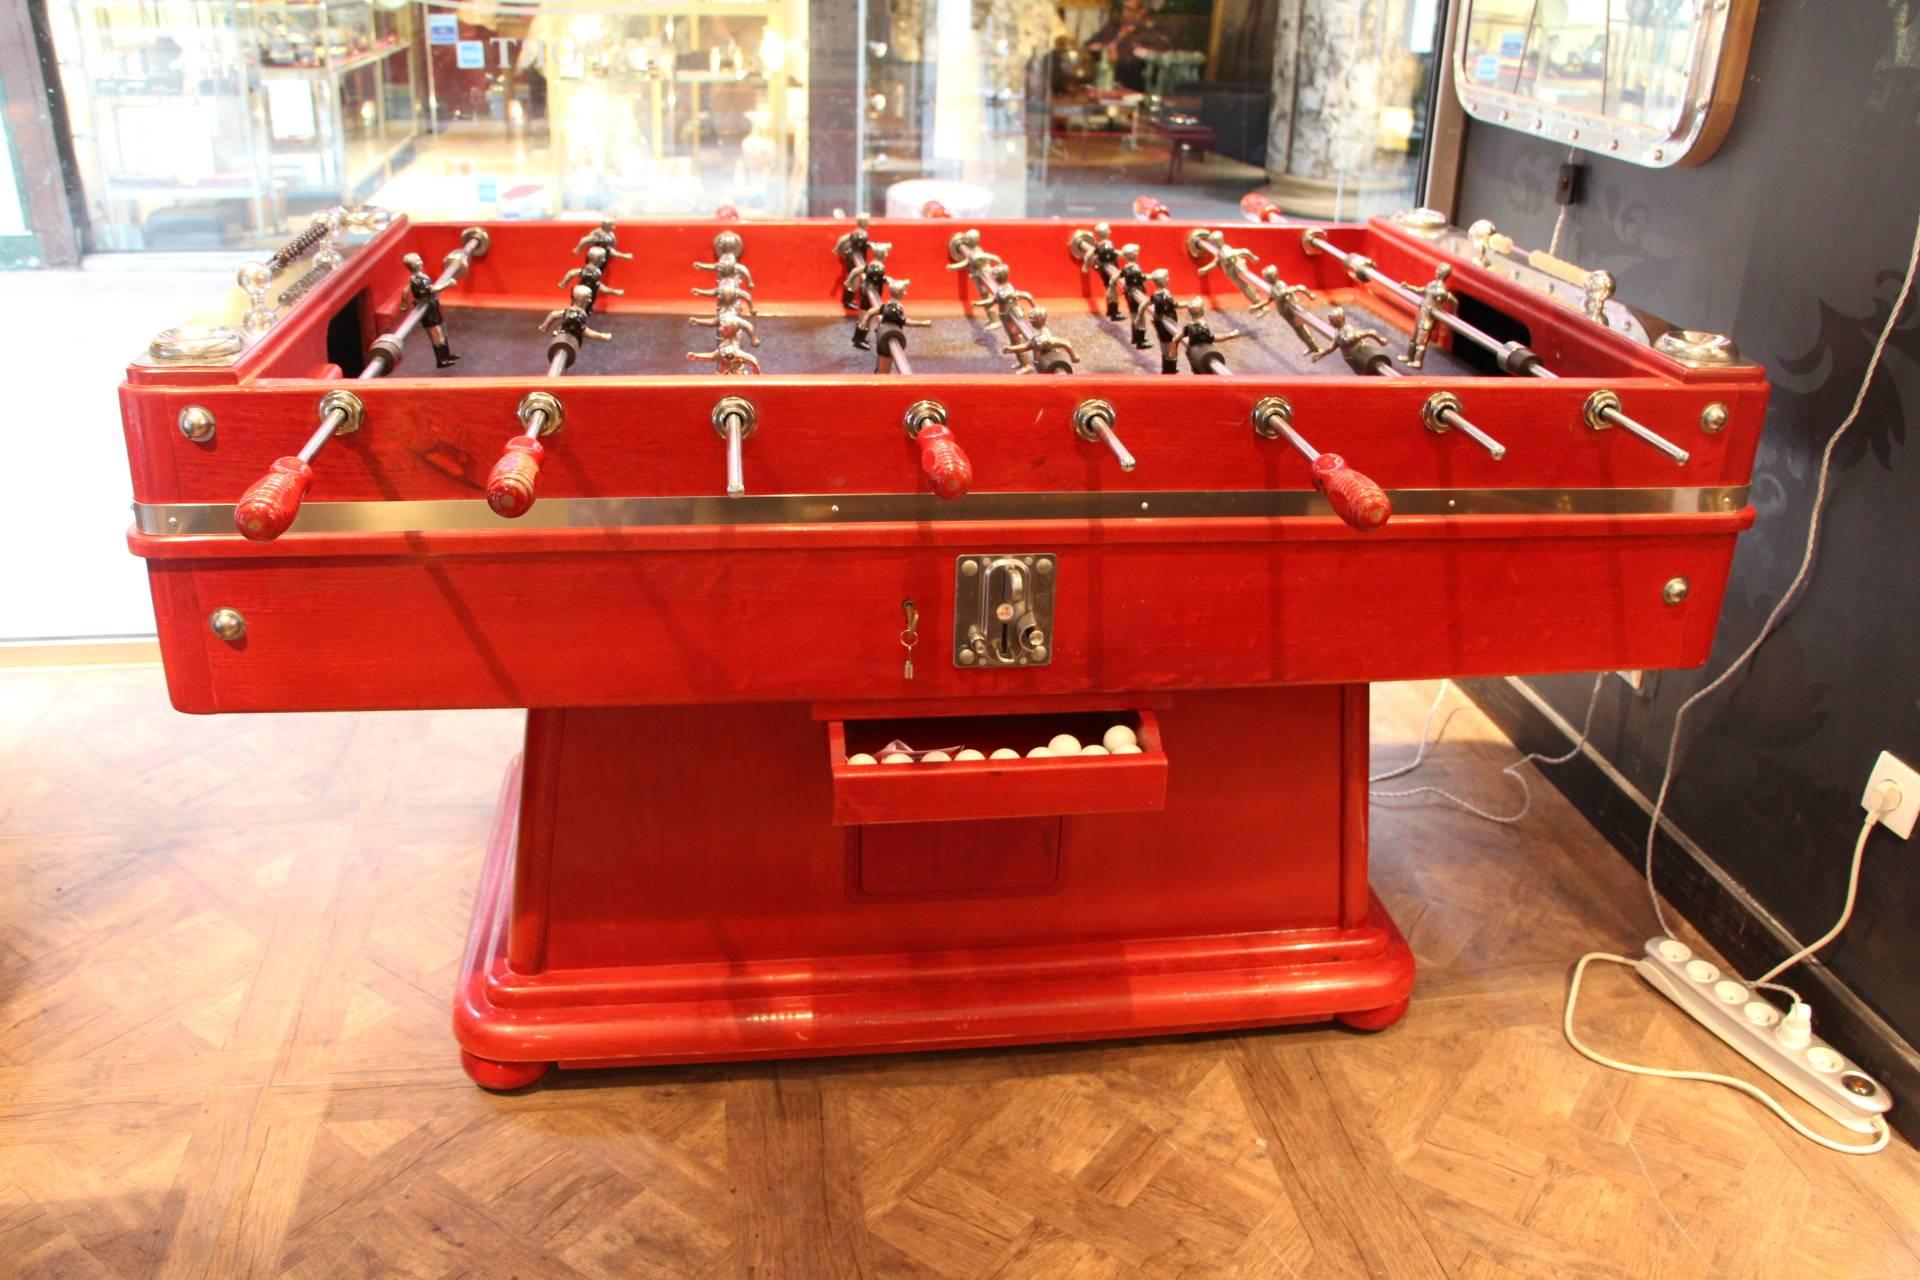 
This foosball table is very impressive due to its size and to its cast metal polished players that have two legs and two arms instead of only one block.
Original red lacquer finish.
Moreover, thanks to its sloped paying surface, the ball is